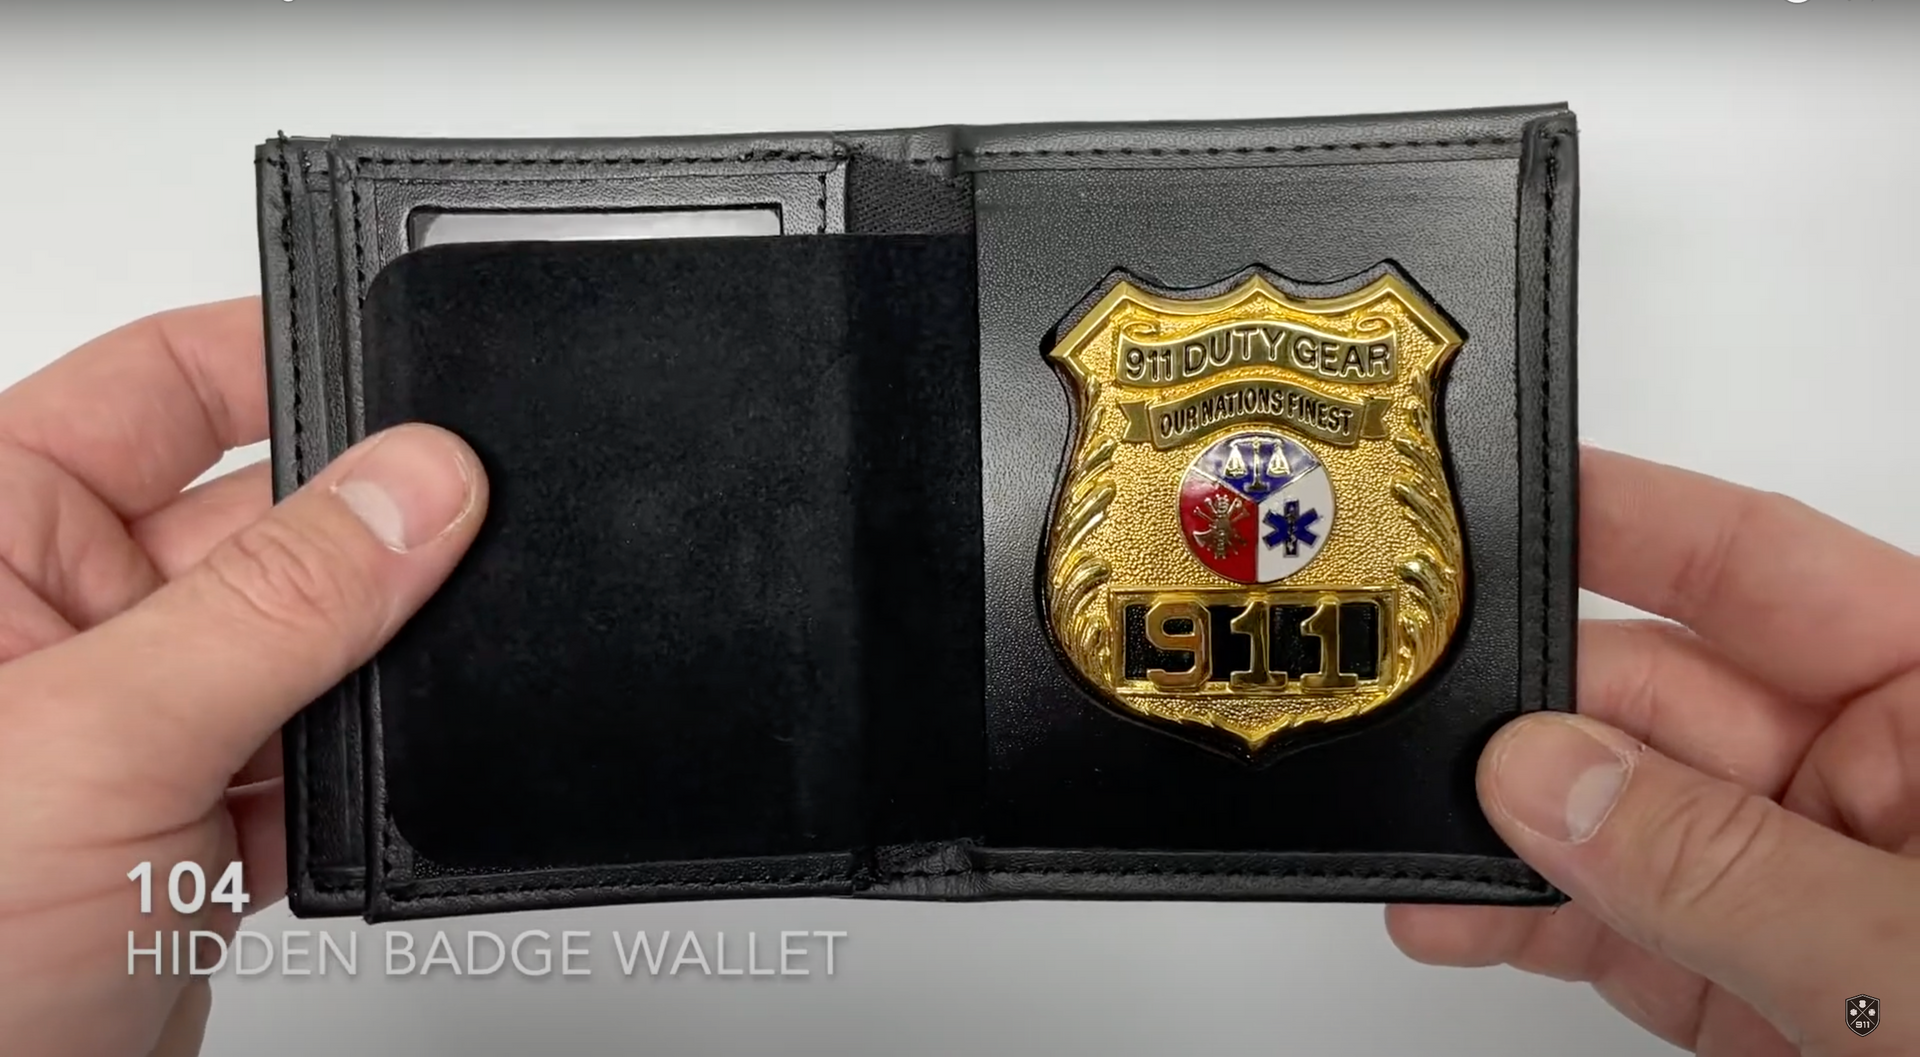 Load video: 104 Leather Badge Wallet by Perfect fit Product Video Best Badge Wallet American Made USA